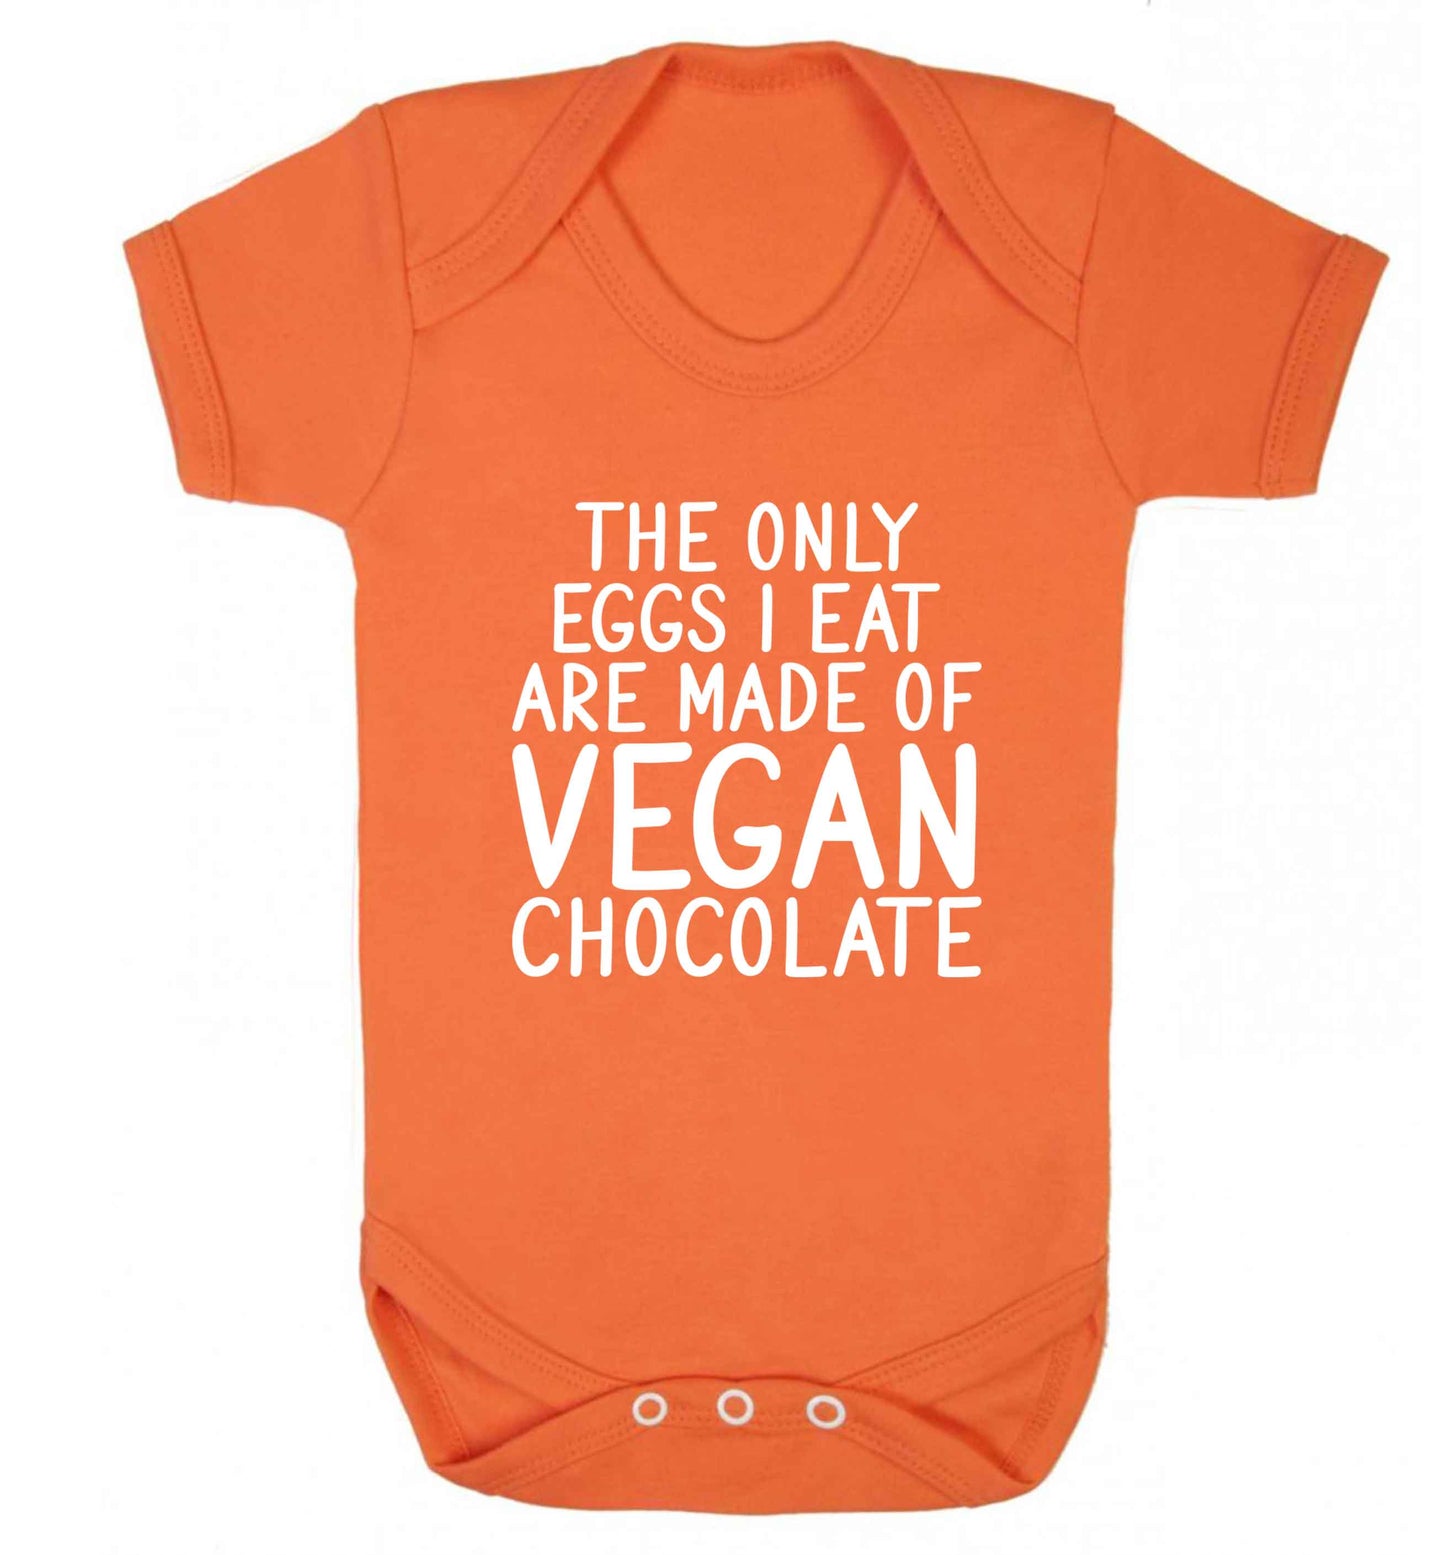 The only eggs I eat are made of vegan chocolate baby vest orange 18-24 months